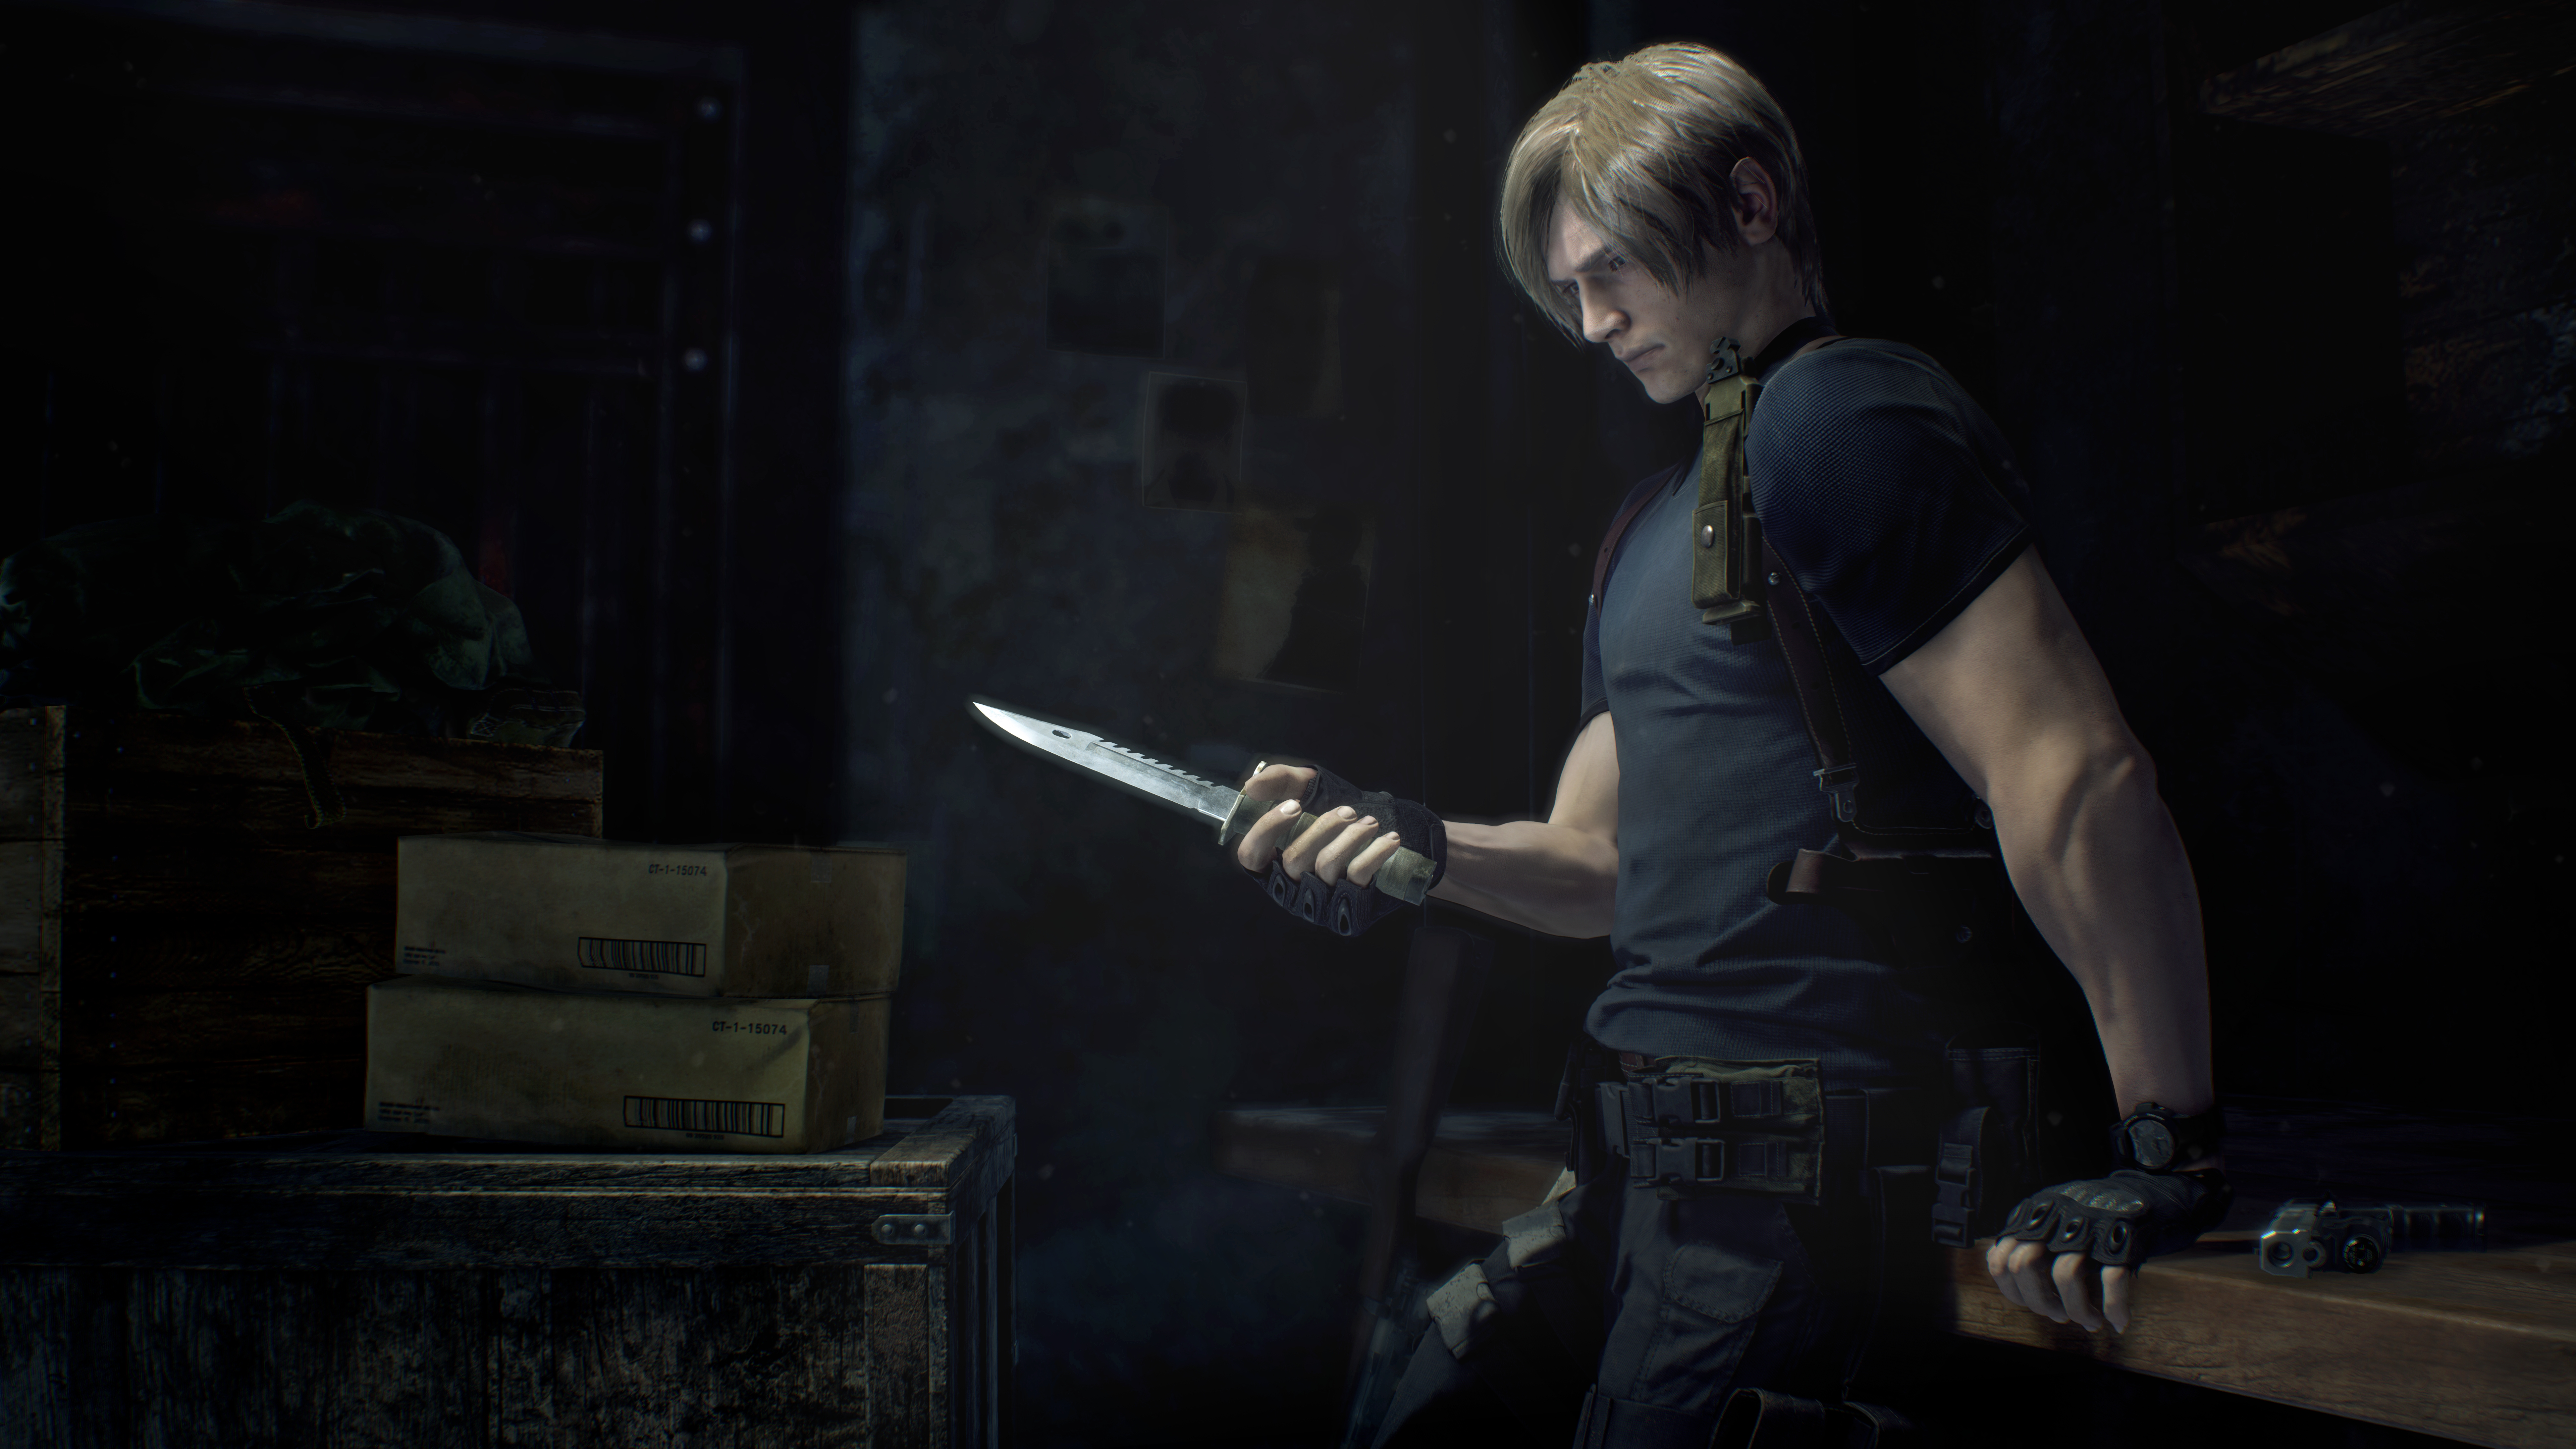 No Code Veronica Remake Currently Planned, Resident Evil Producer Says -  GameSpot